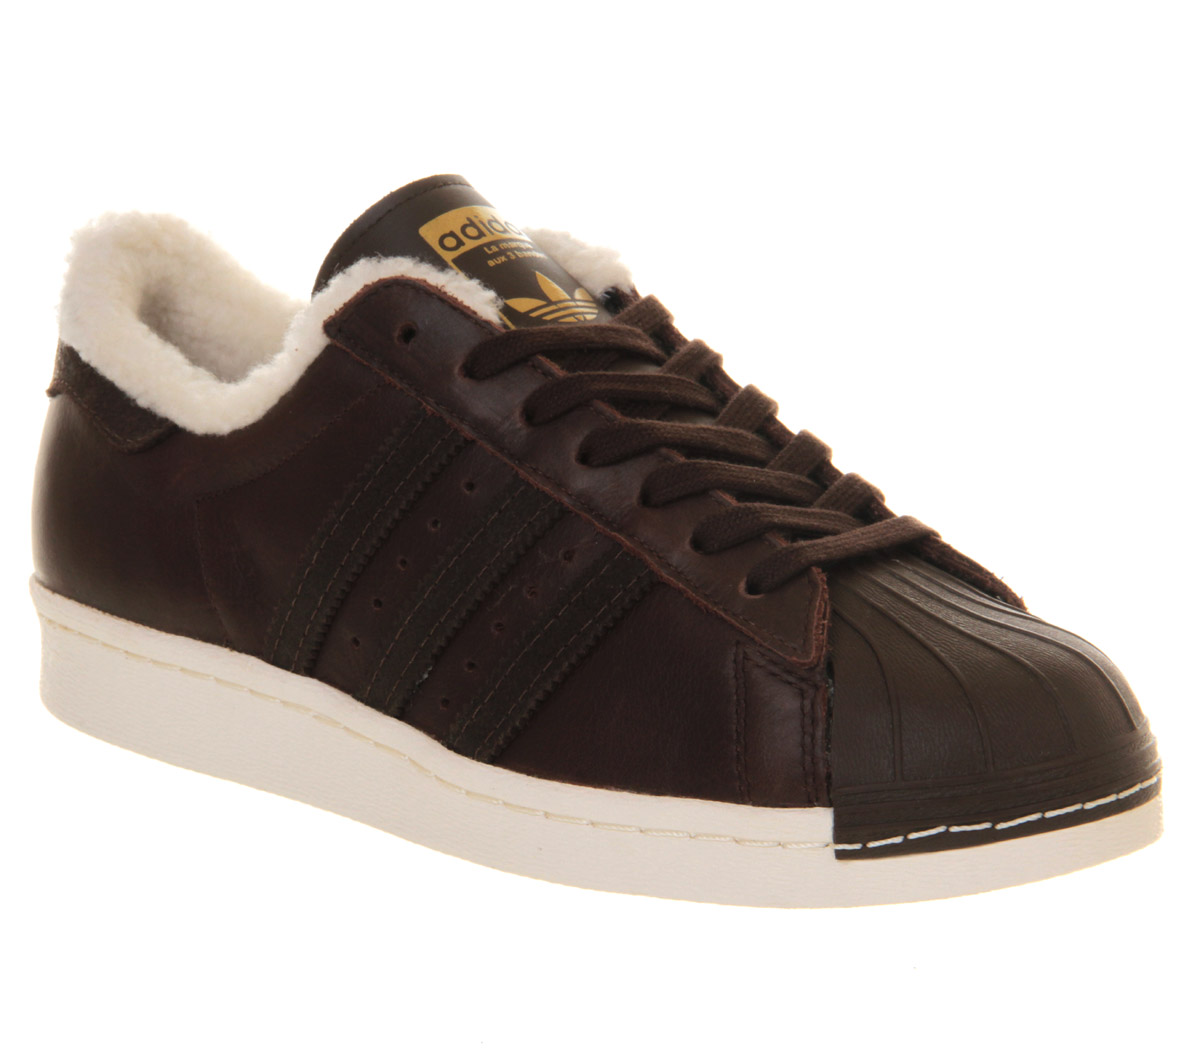 adidas Superstar 80s Brown Shearling - Unisex Sports